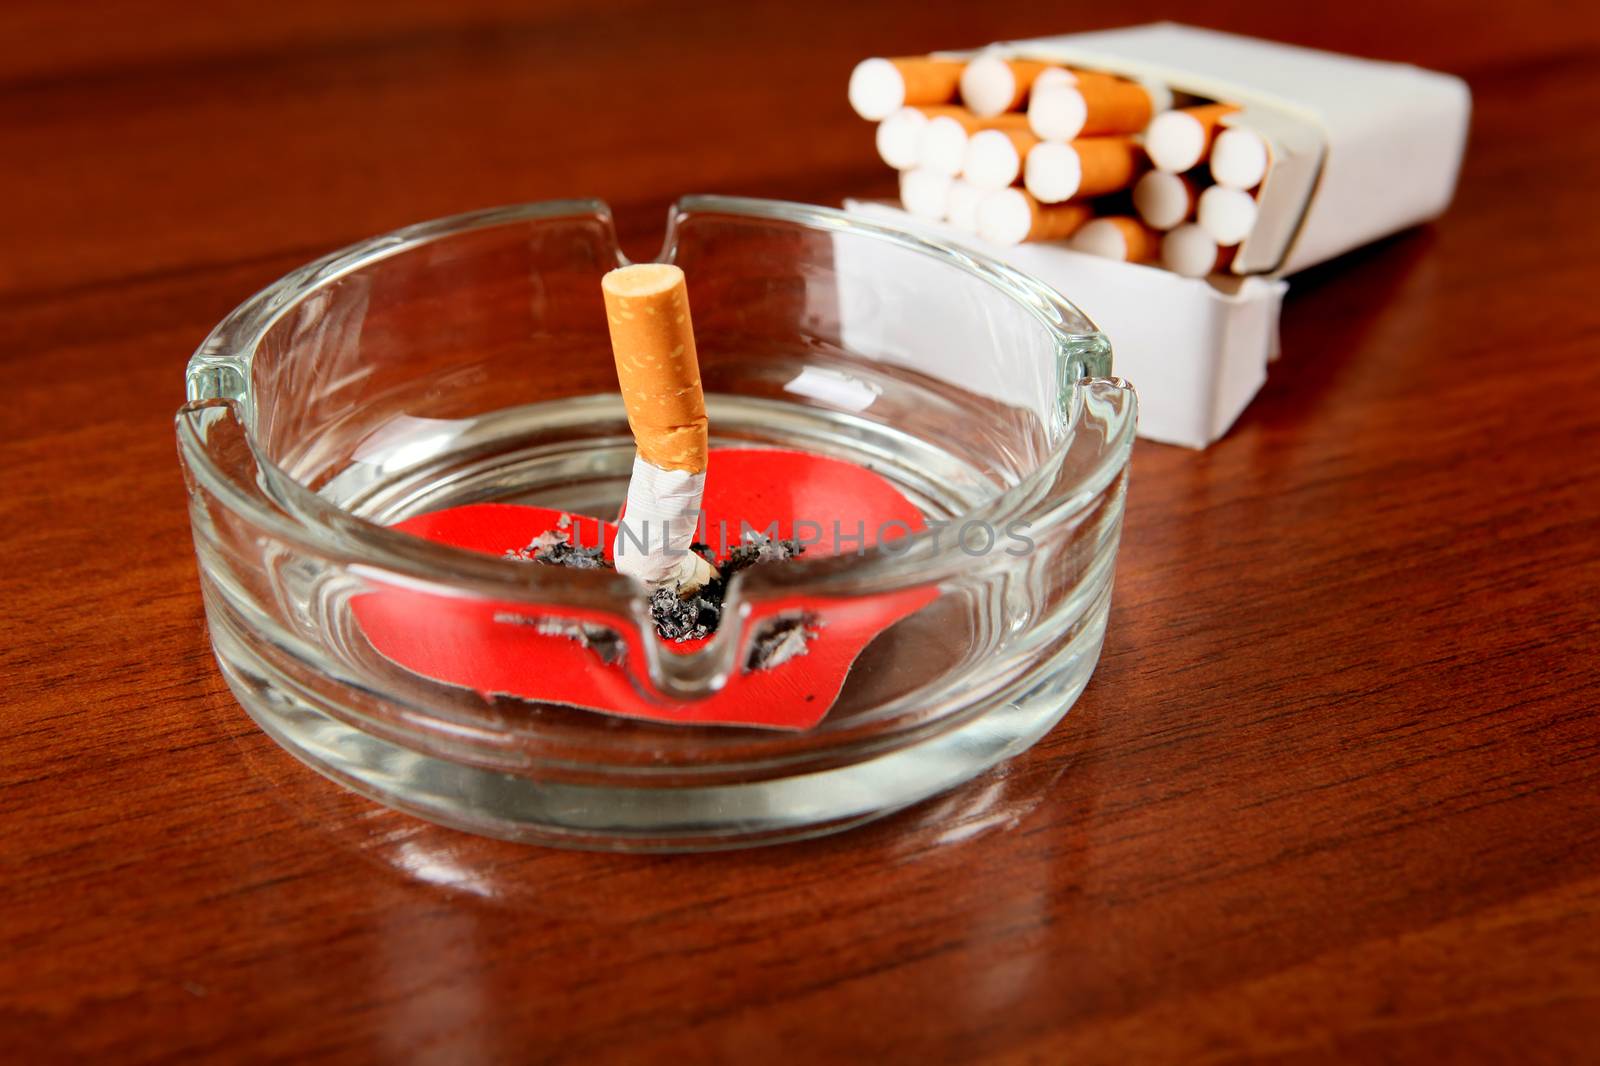 Cigarette in Ashtray with Heart Shape on the Table